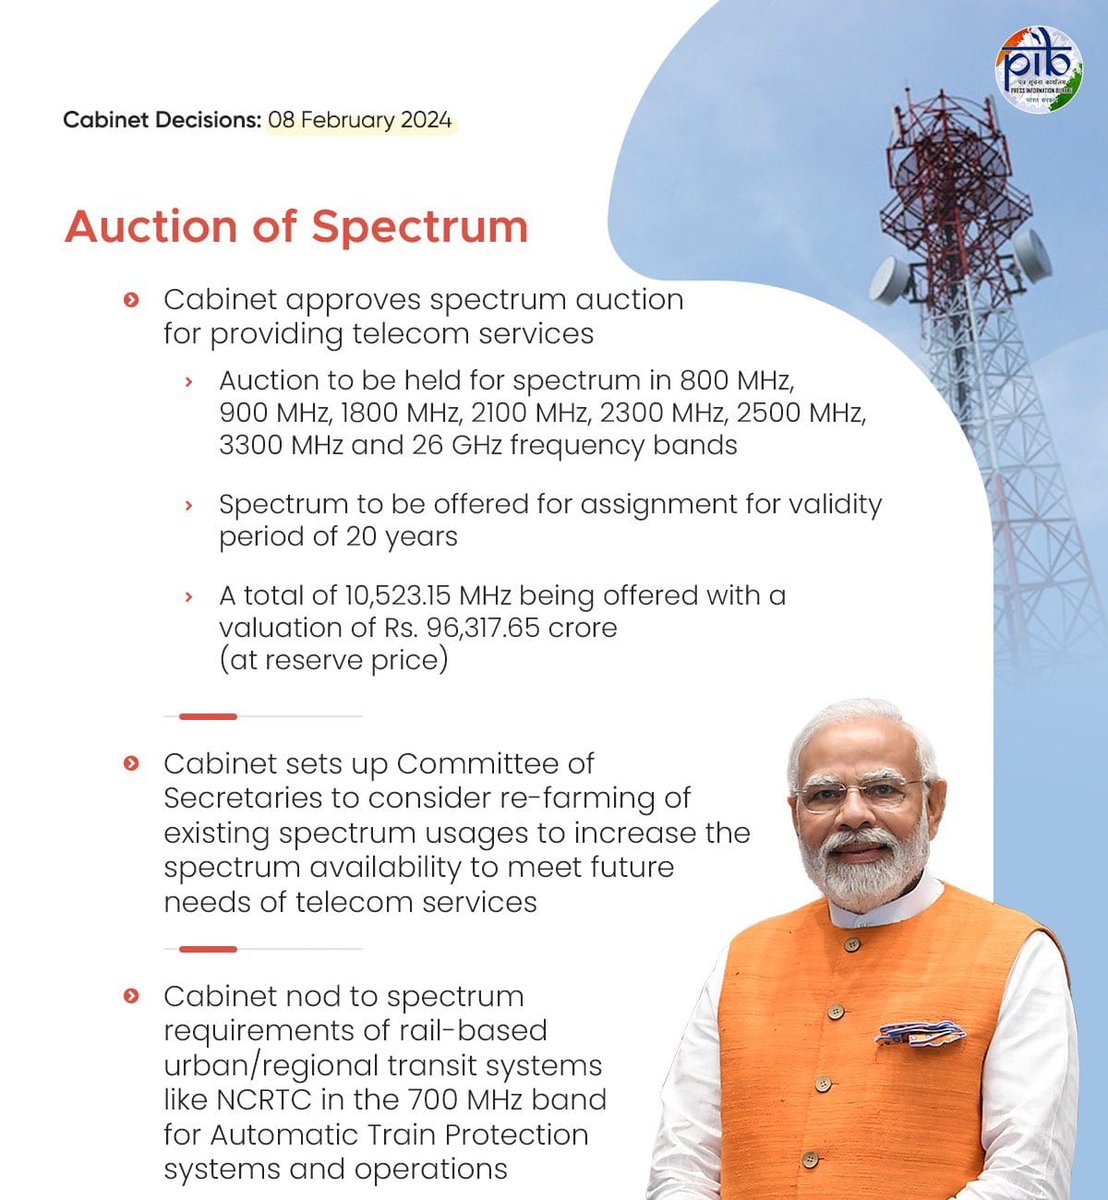 The Union Cabinet has approved @DoT_India's proposal for a #SpectrumAuction to enhance telecom services. The allocation of additional spectrum is set to elevate service quality & coverage for consumers.

@narendramodi
#CabinetDecisions